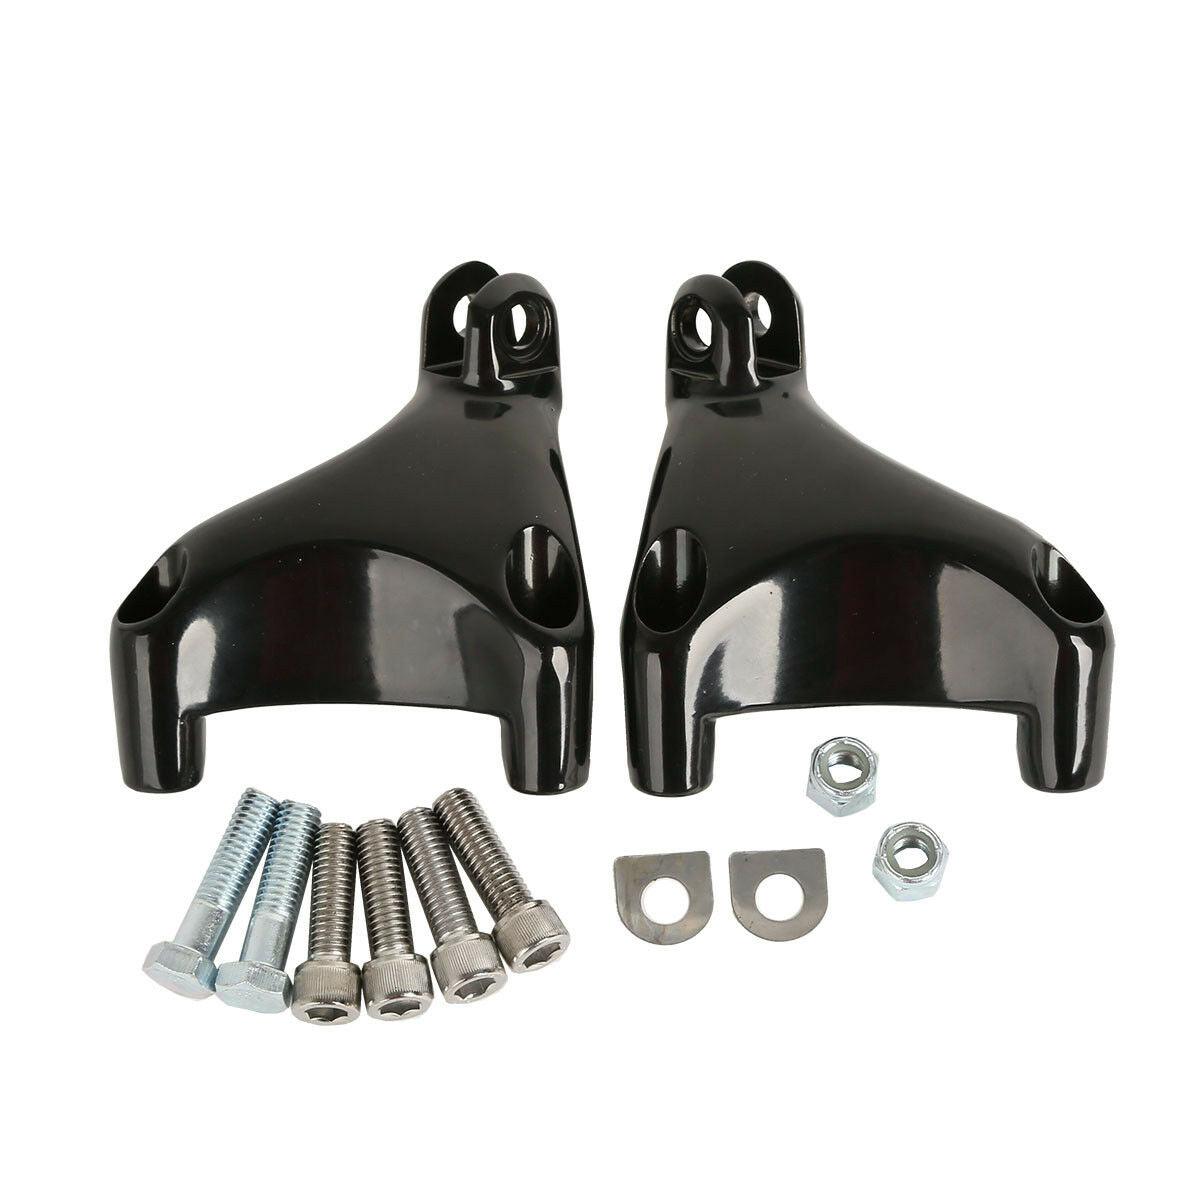 Rear Footpeg Foot Pegs Mounting Clamp Fit For Harley 883 1200 XL Sportster 04-13 - Moto Life Products